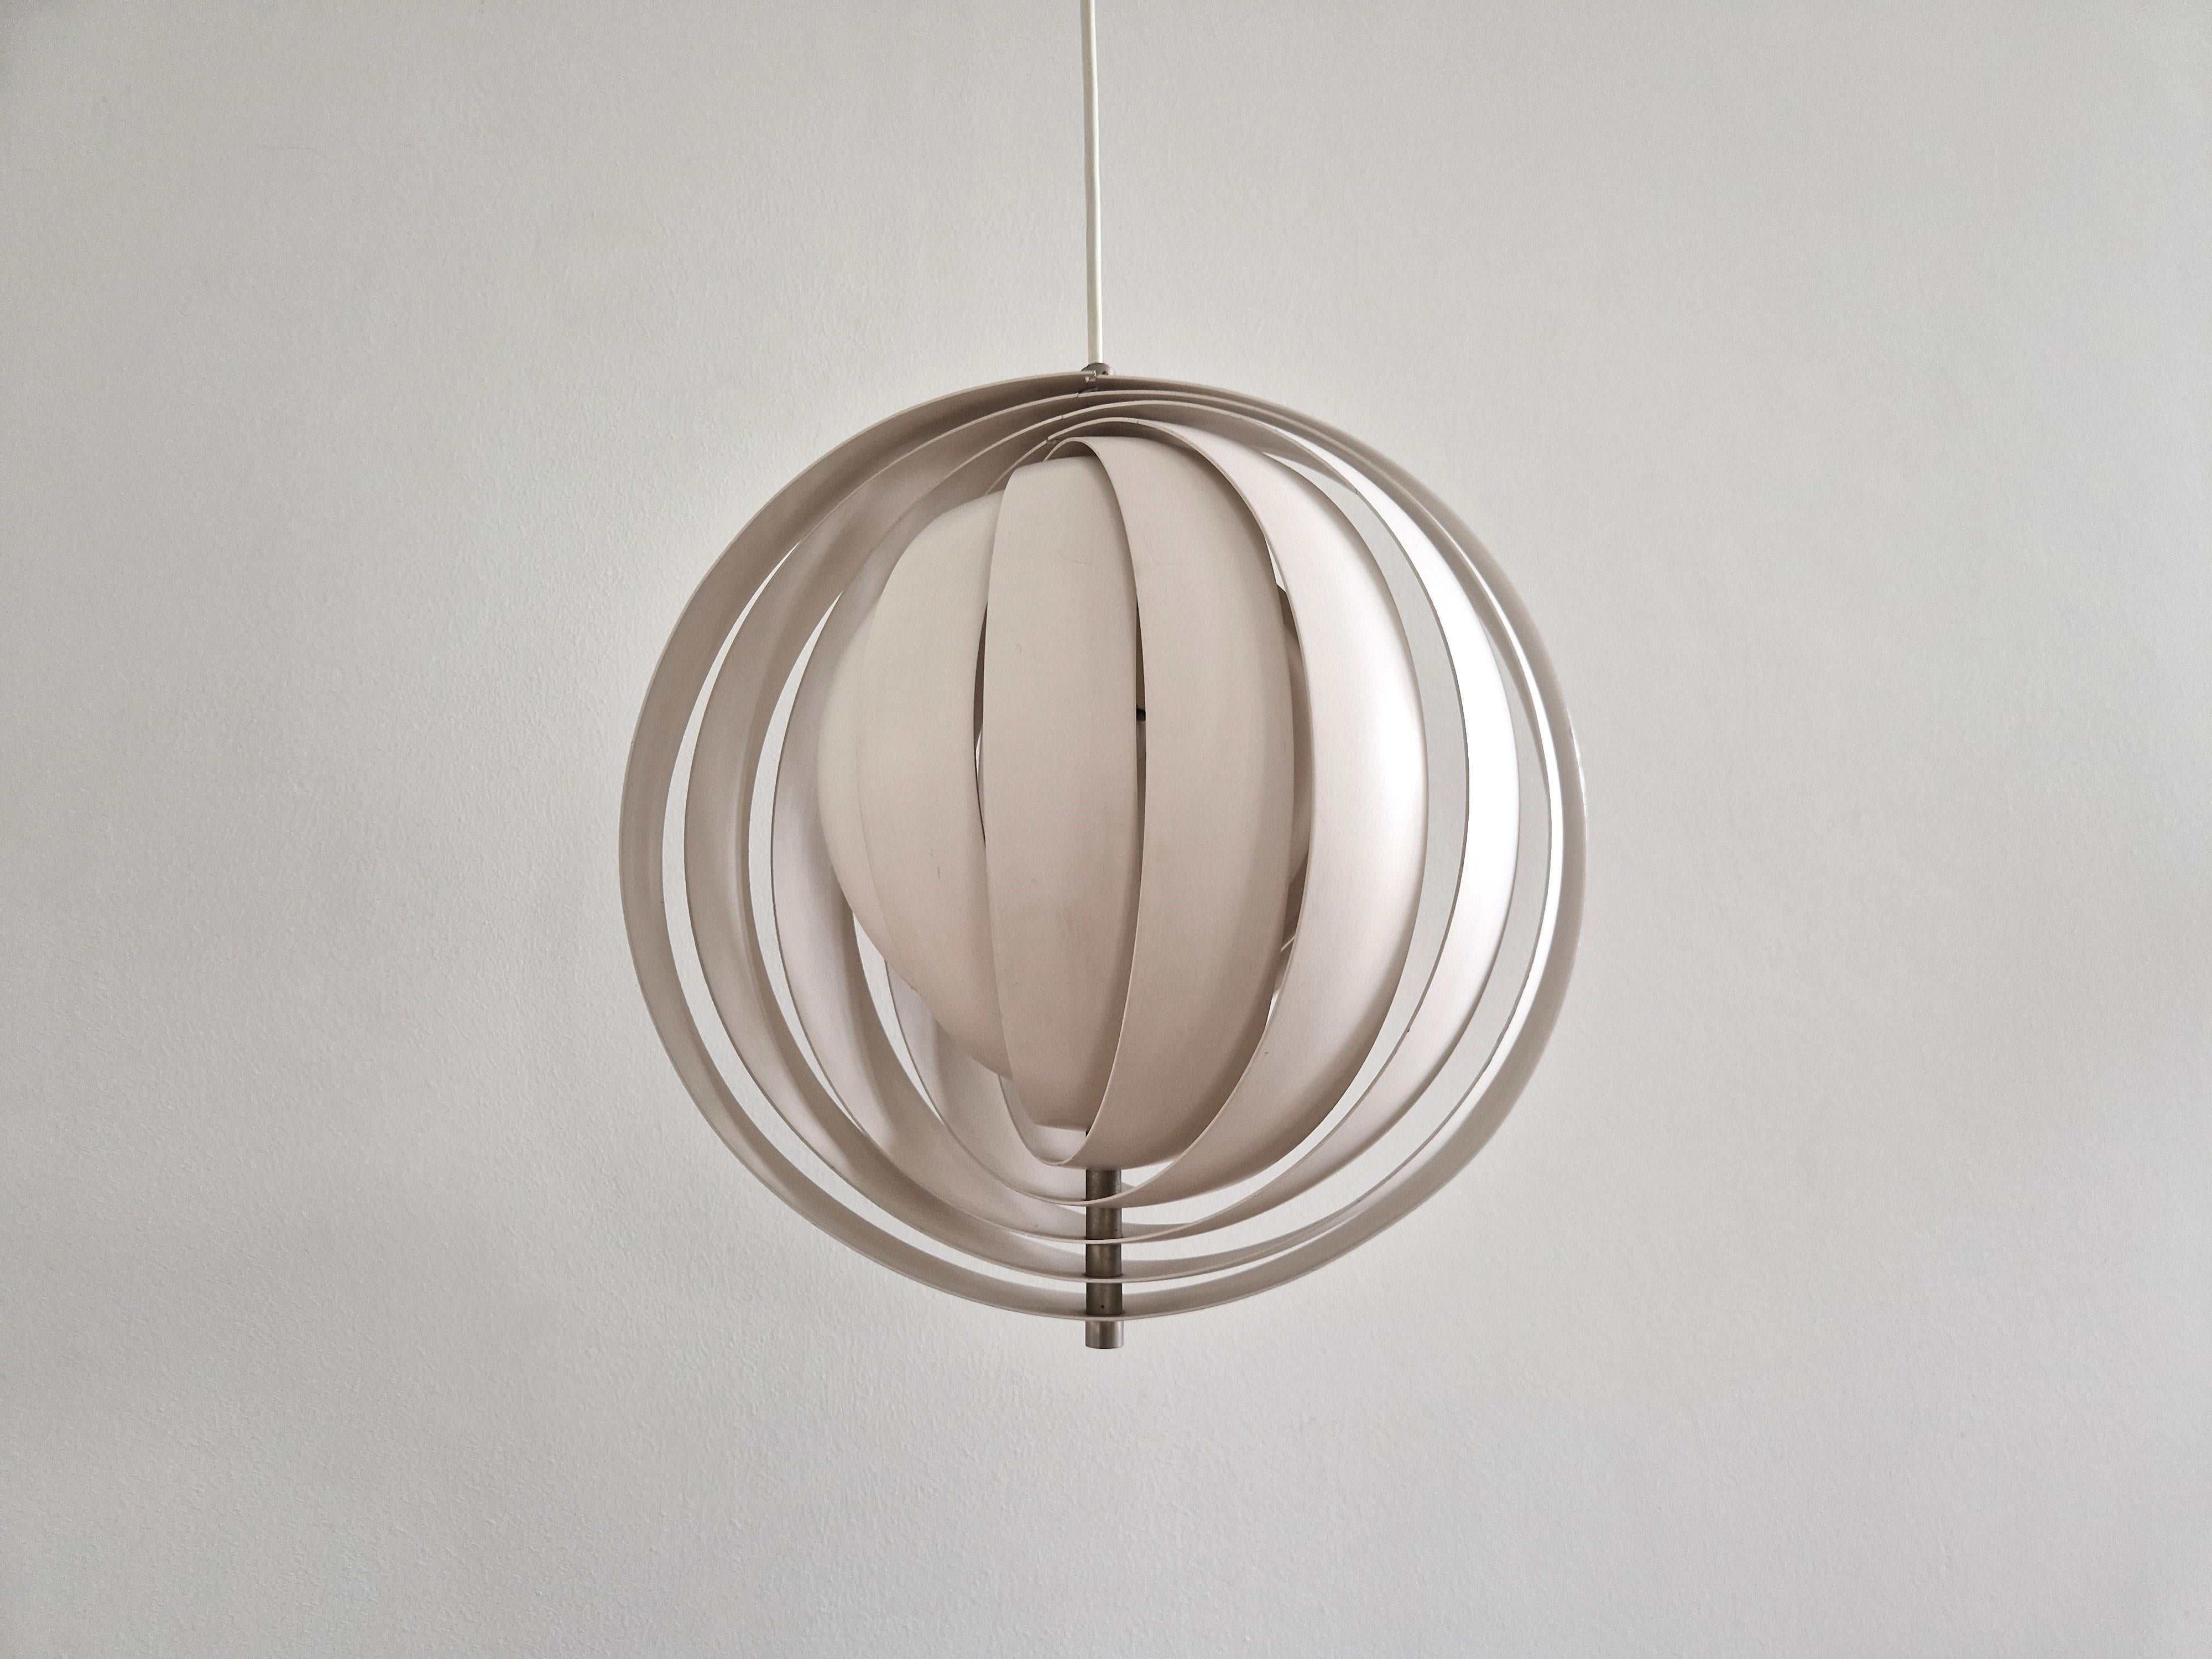 This is an early version of the 'Moon lamp' (in the USA 'Visor') by Verner Panton for Louis Poulsen. A design from the 1960's and still an eye-catcher today. An exceptional light that gives a great light to a room as the light gets diffused by the